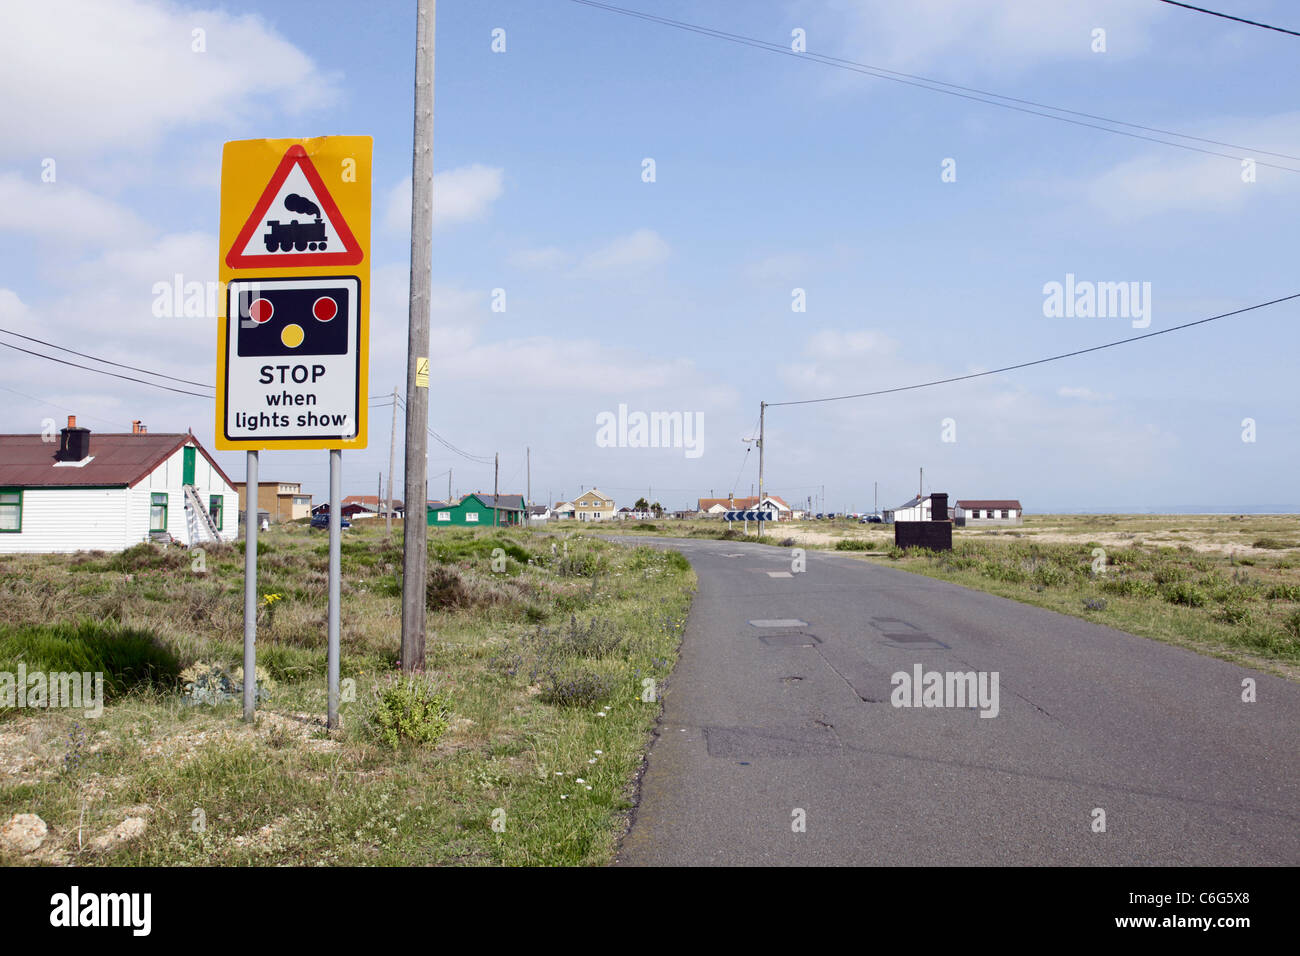 Level crossing stop sign for Romney Hythe and Dymchurch Railway at Dungeness Stock Photo